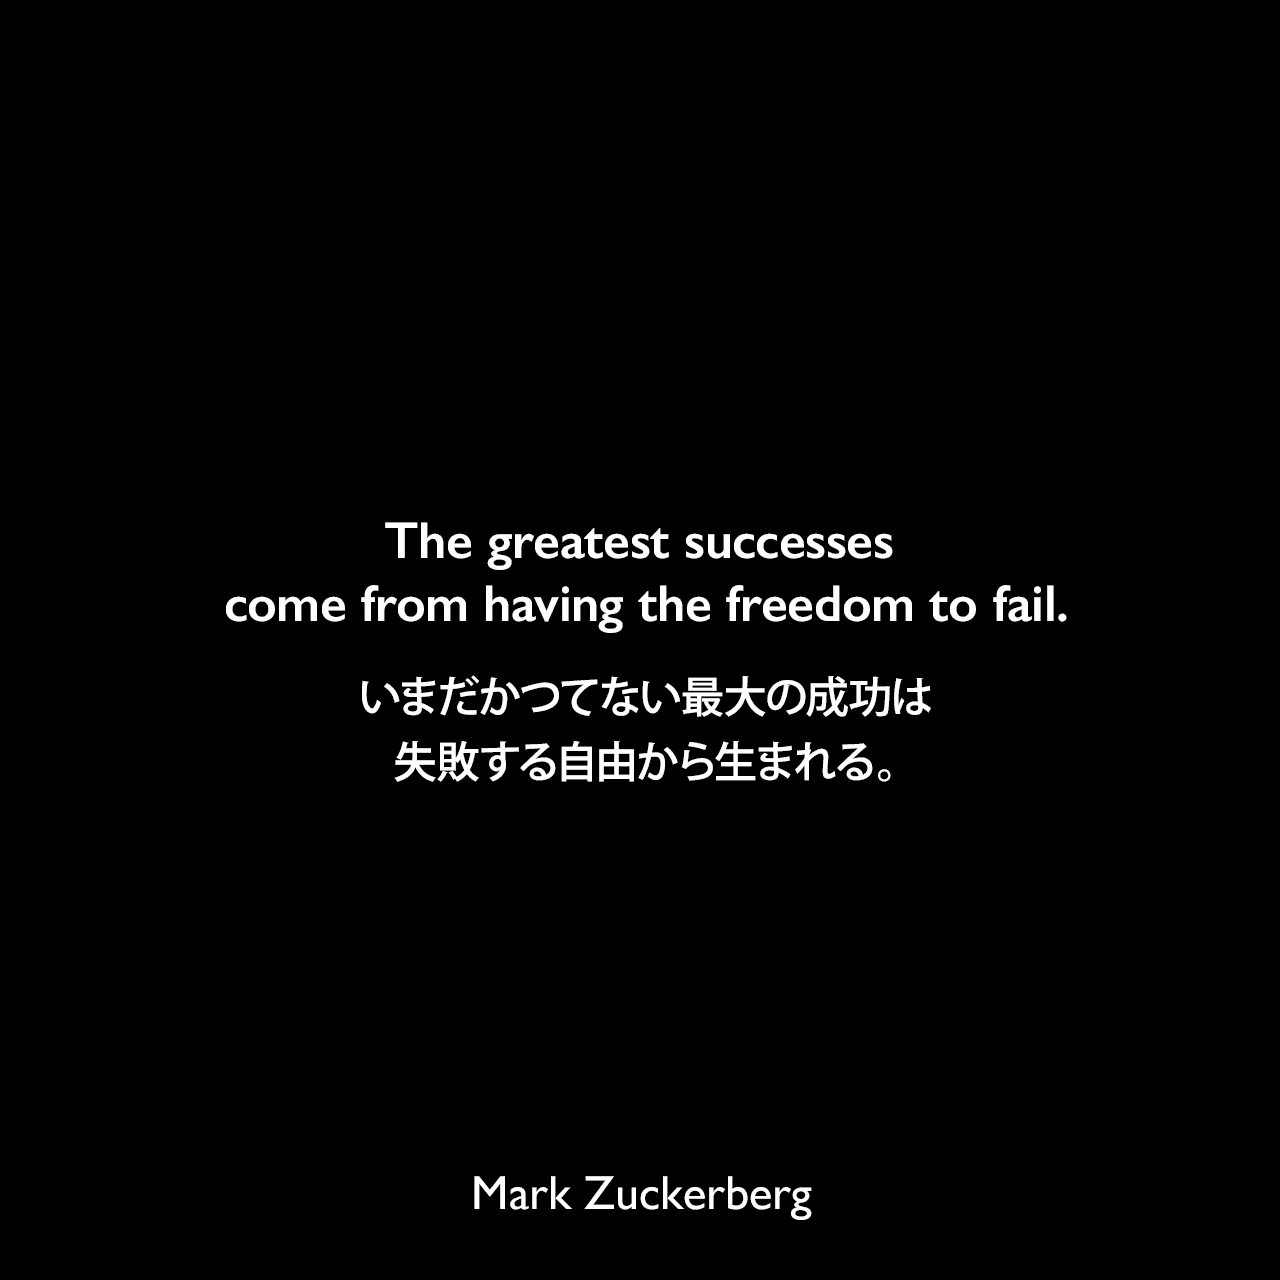 The greatest successes come from having the freedom to fail.いまだかつてない最大の成功は 、失敗する自由から生まれる。- 2017年 ハーバード大学の卒業式でスピーチより